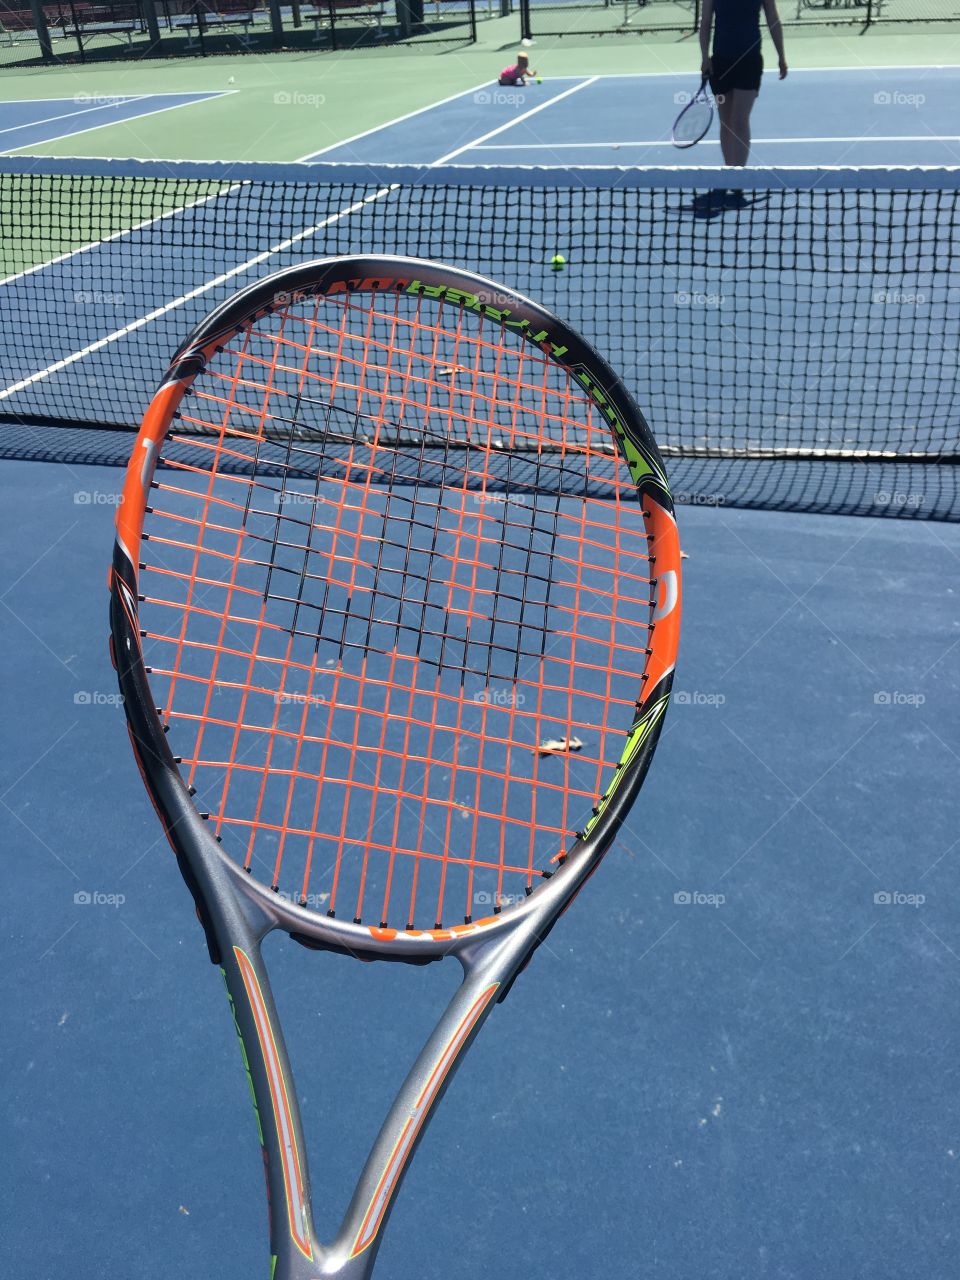 Tennis for fun. This is a Shot of the tennis racket while looking down at the court. 